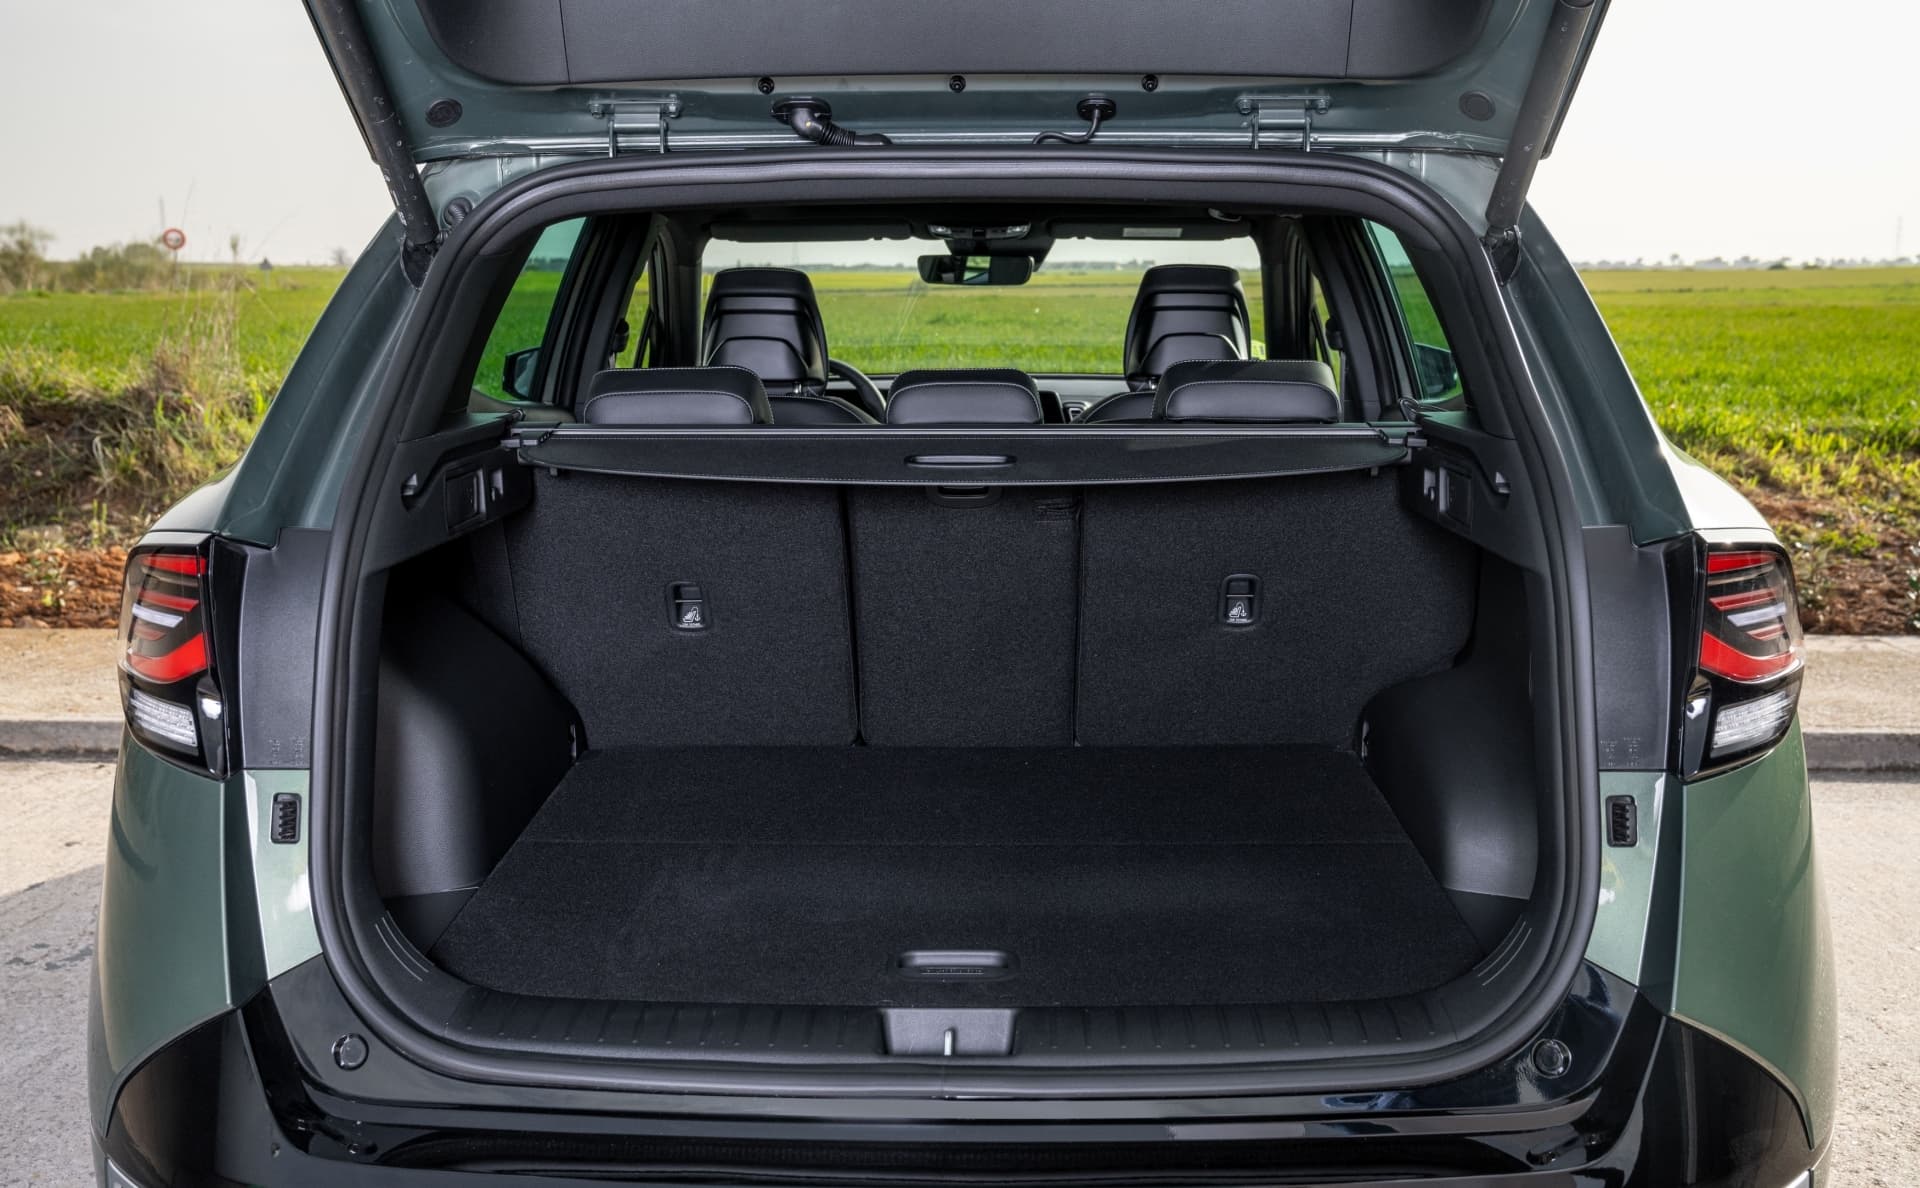 It is no coincidence that it is Kia’s best-selling model: almost 600 liters of luggage space, ECO label and less than €32,000